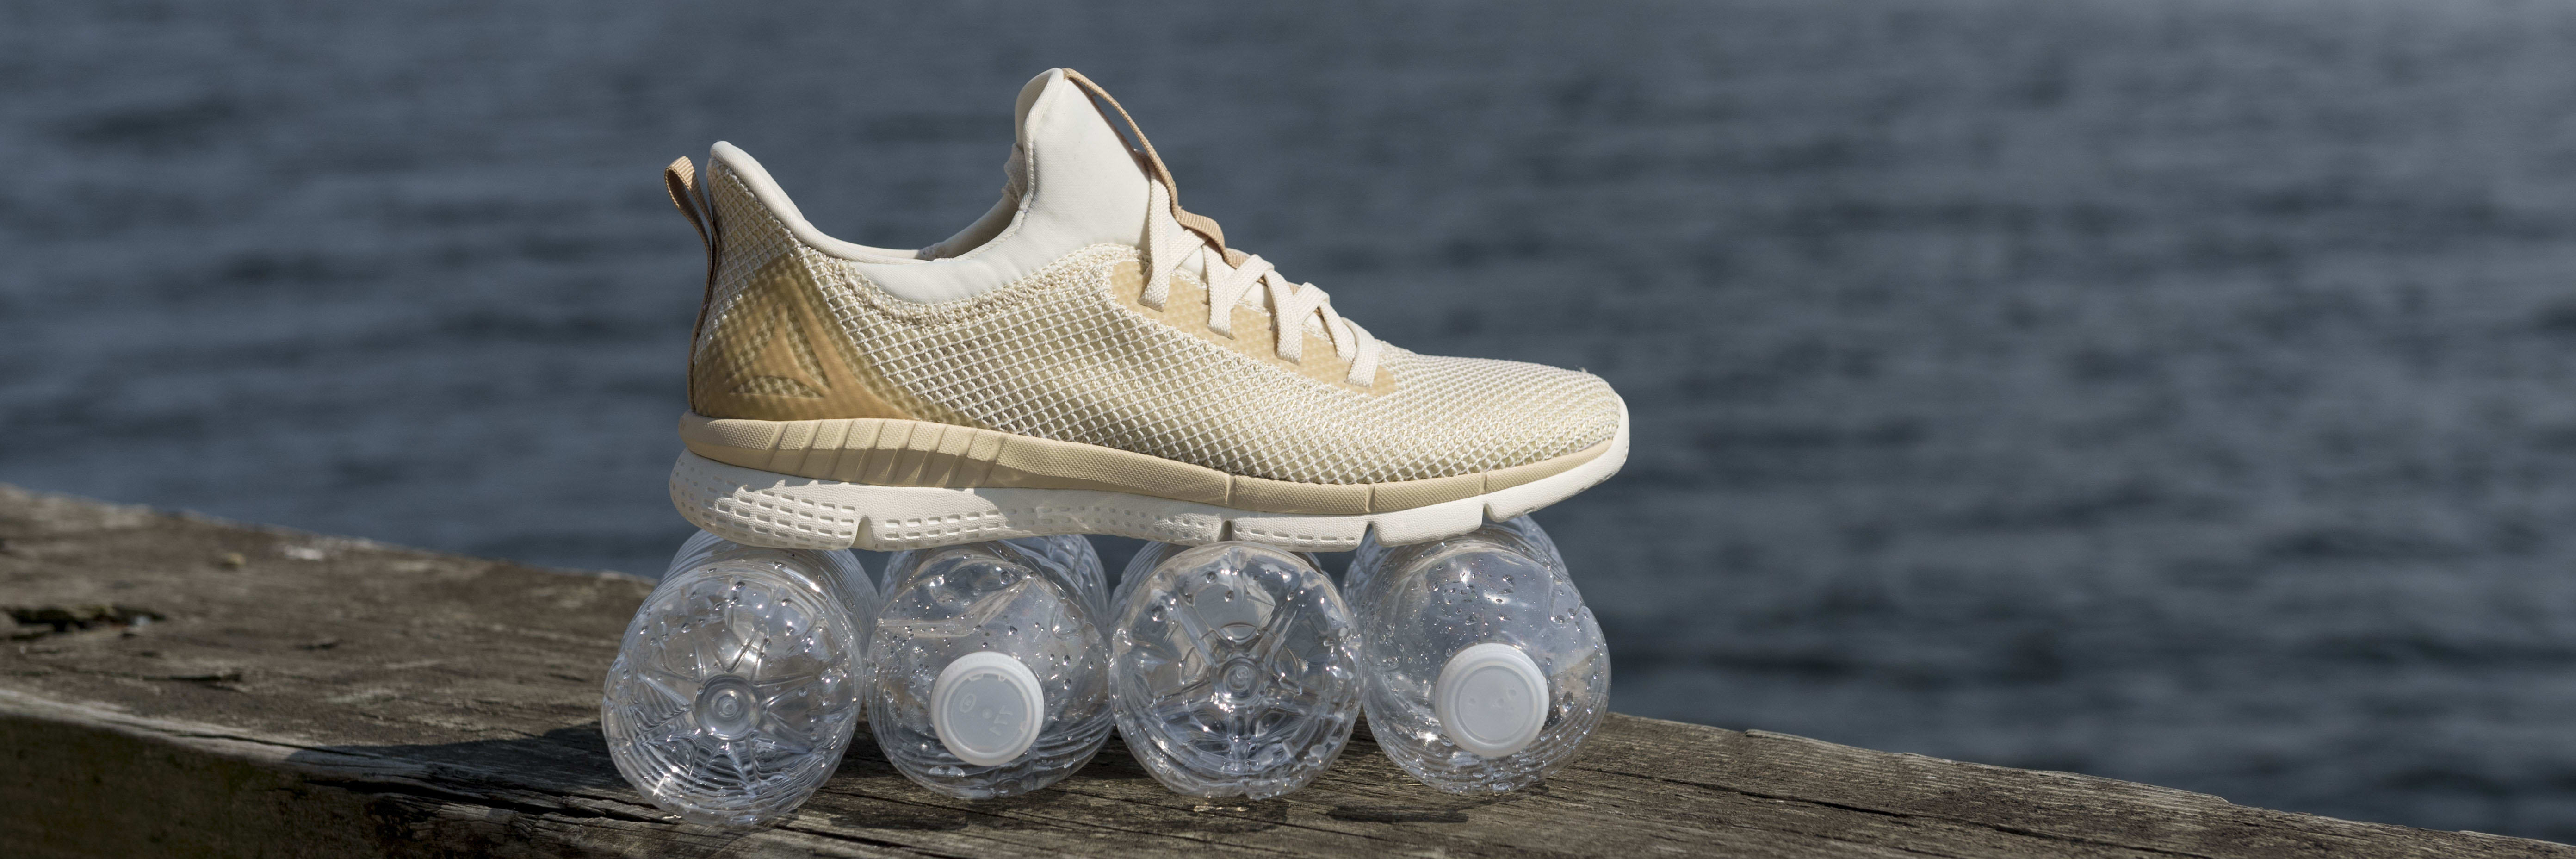 tennis shoes made from recycled plastic